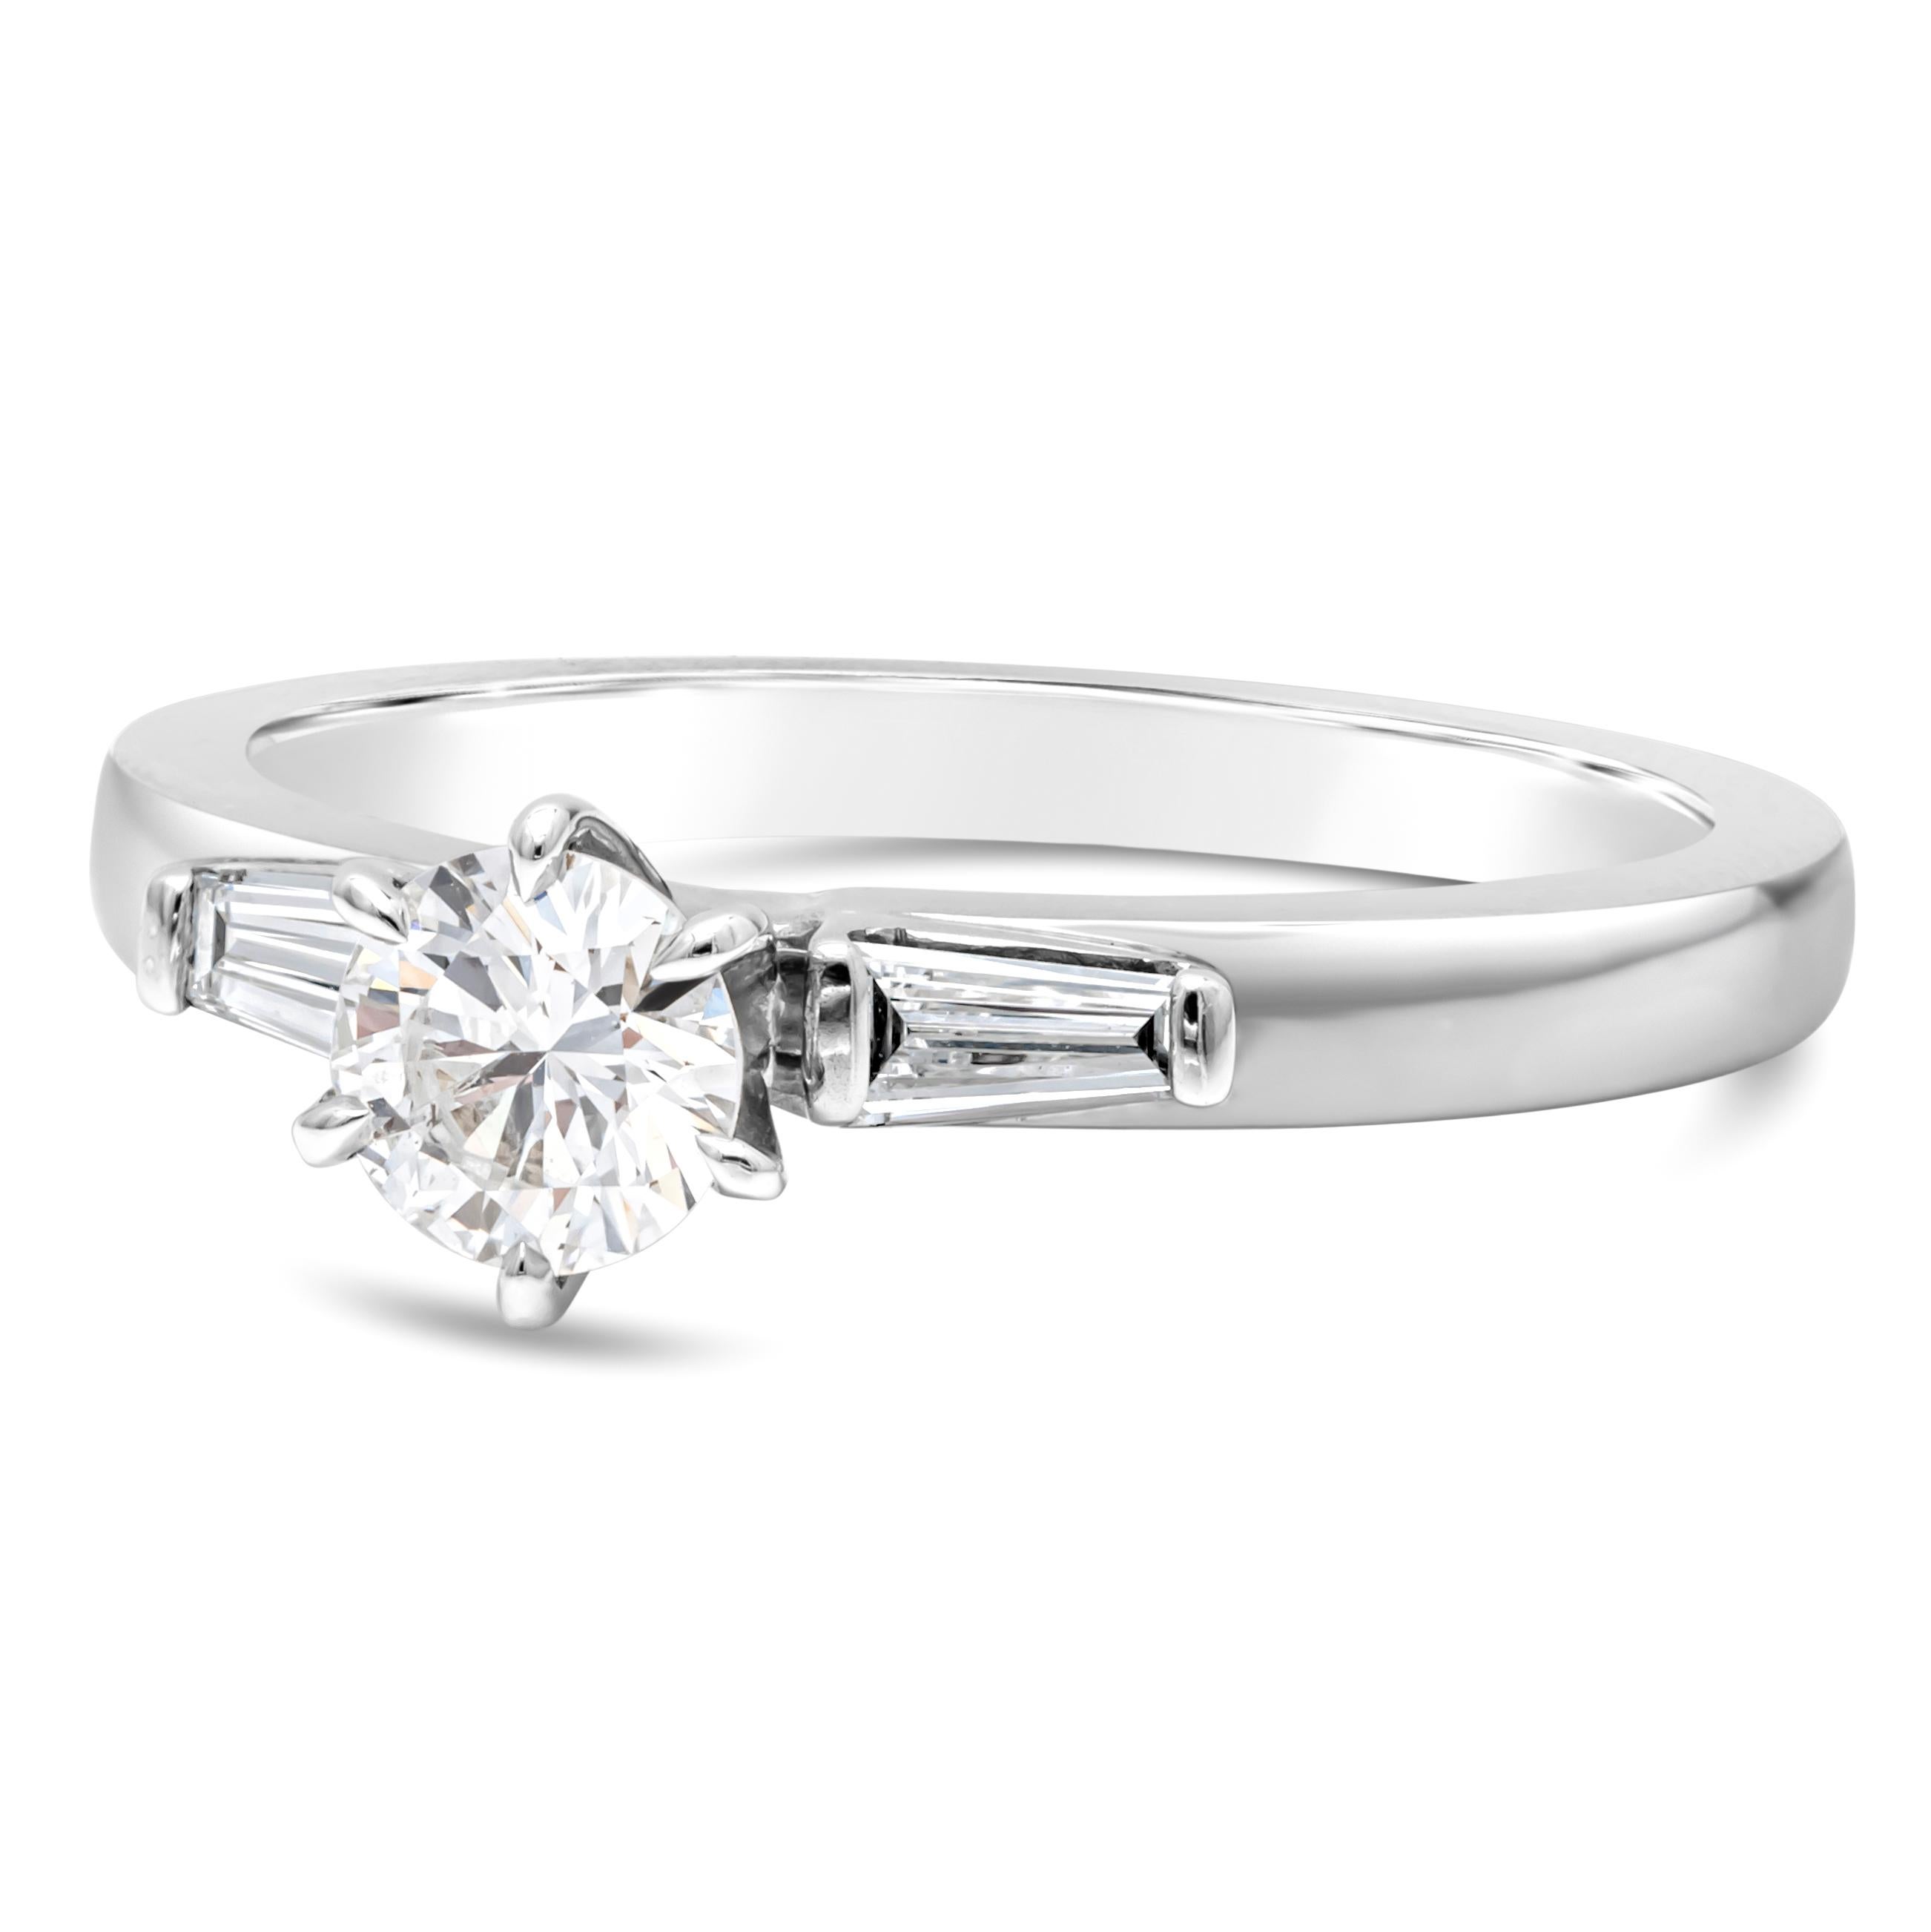 An elegant piece showcasing a vibrant 0.45 carat round brilliant diamond accented with tapered baguette 0.18 carat total diamonds on each side. Center stone is  D color, SI1 in clarity. Set in a six prong basket setting. Finely made in 18K White